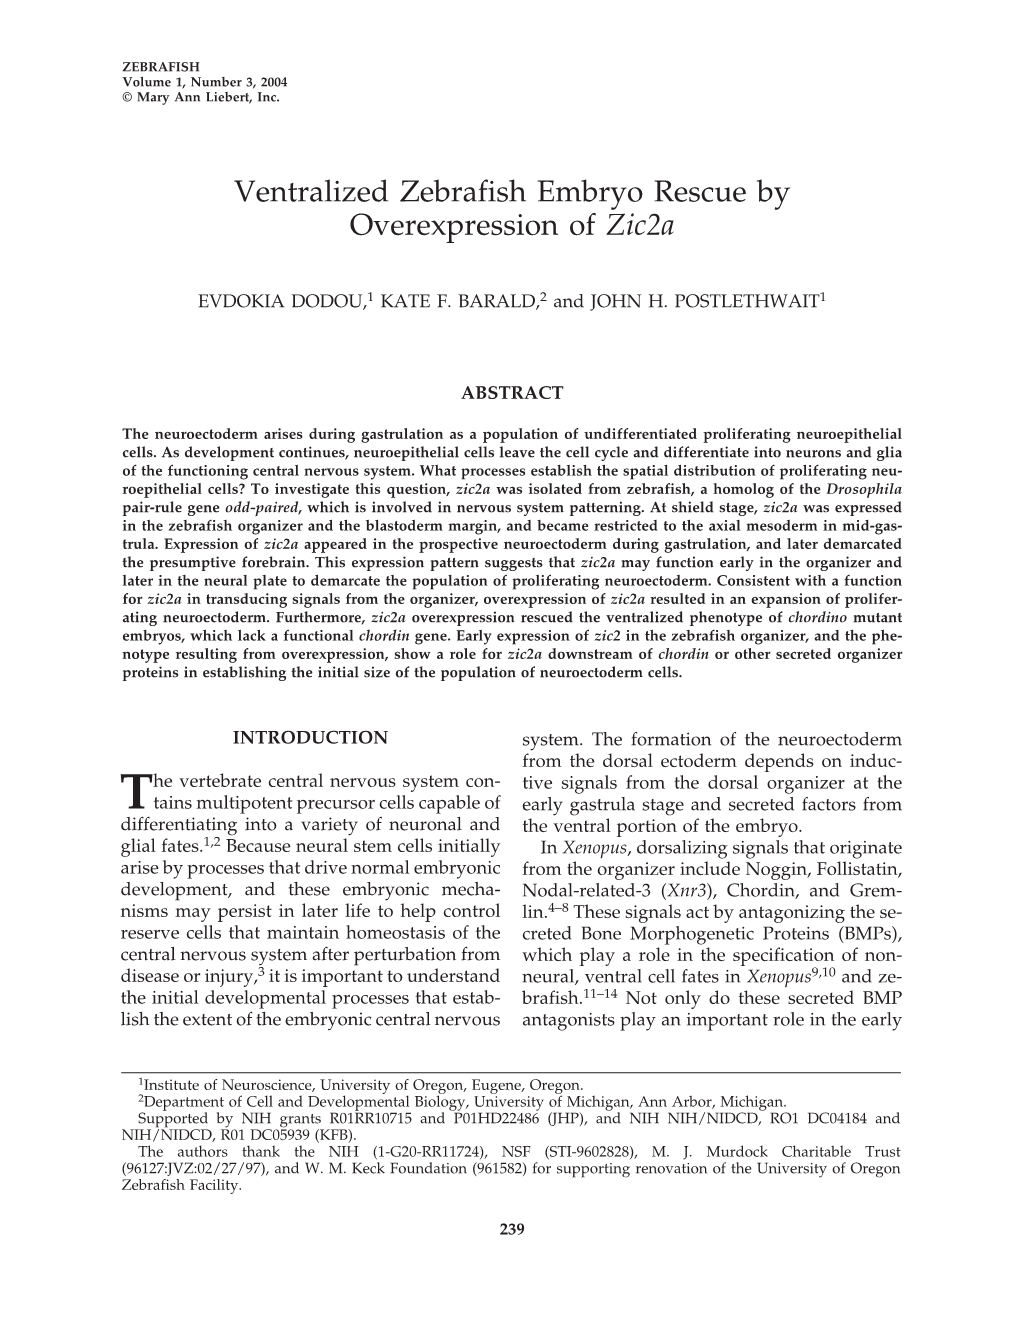 Ventralized Zebrafish Embryo Rescue by Overexpression of Zic2a